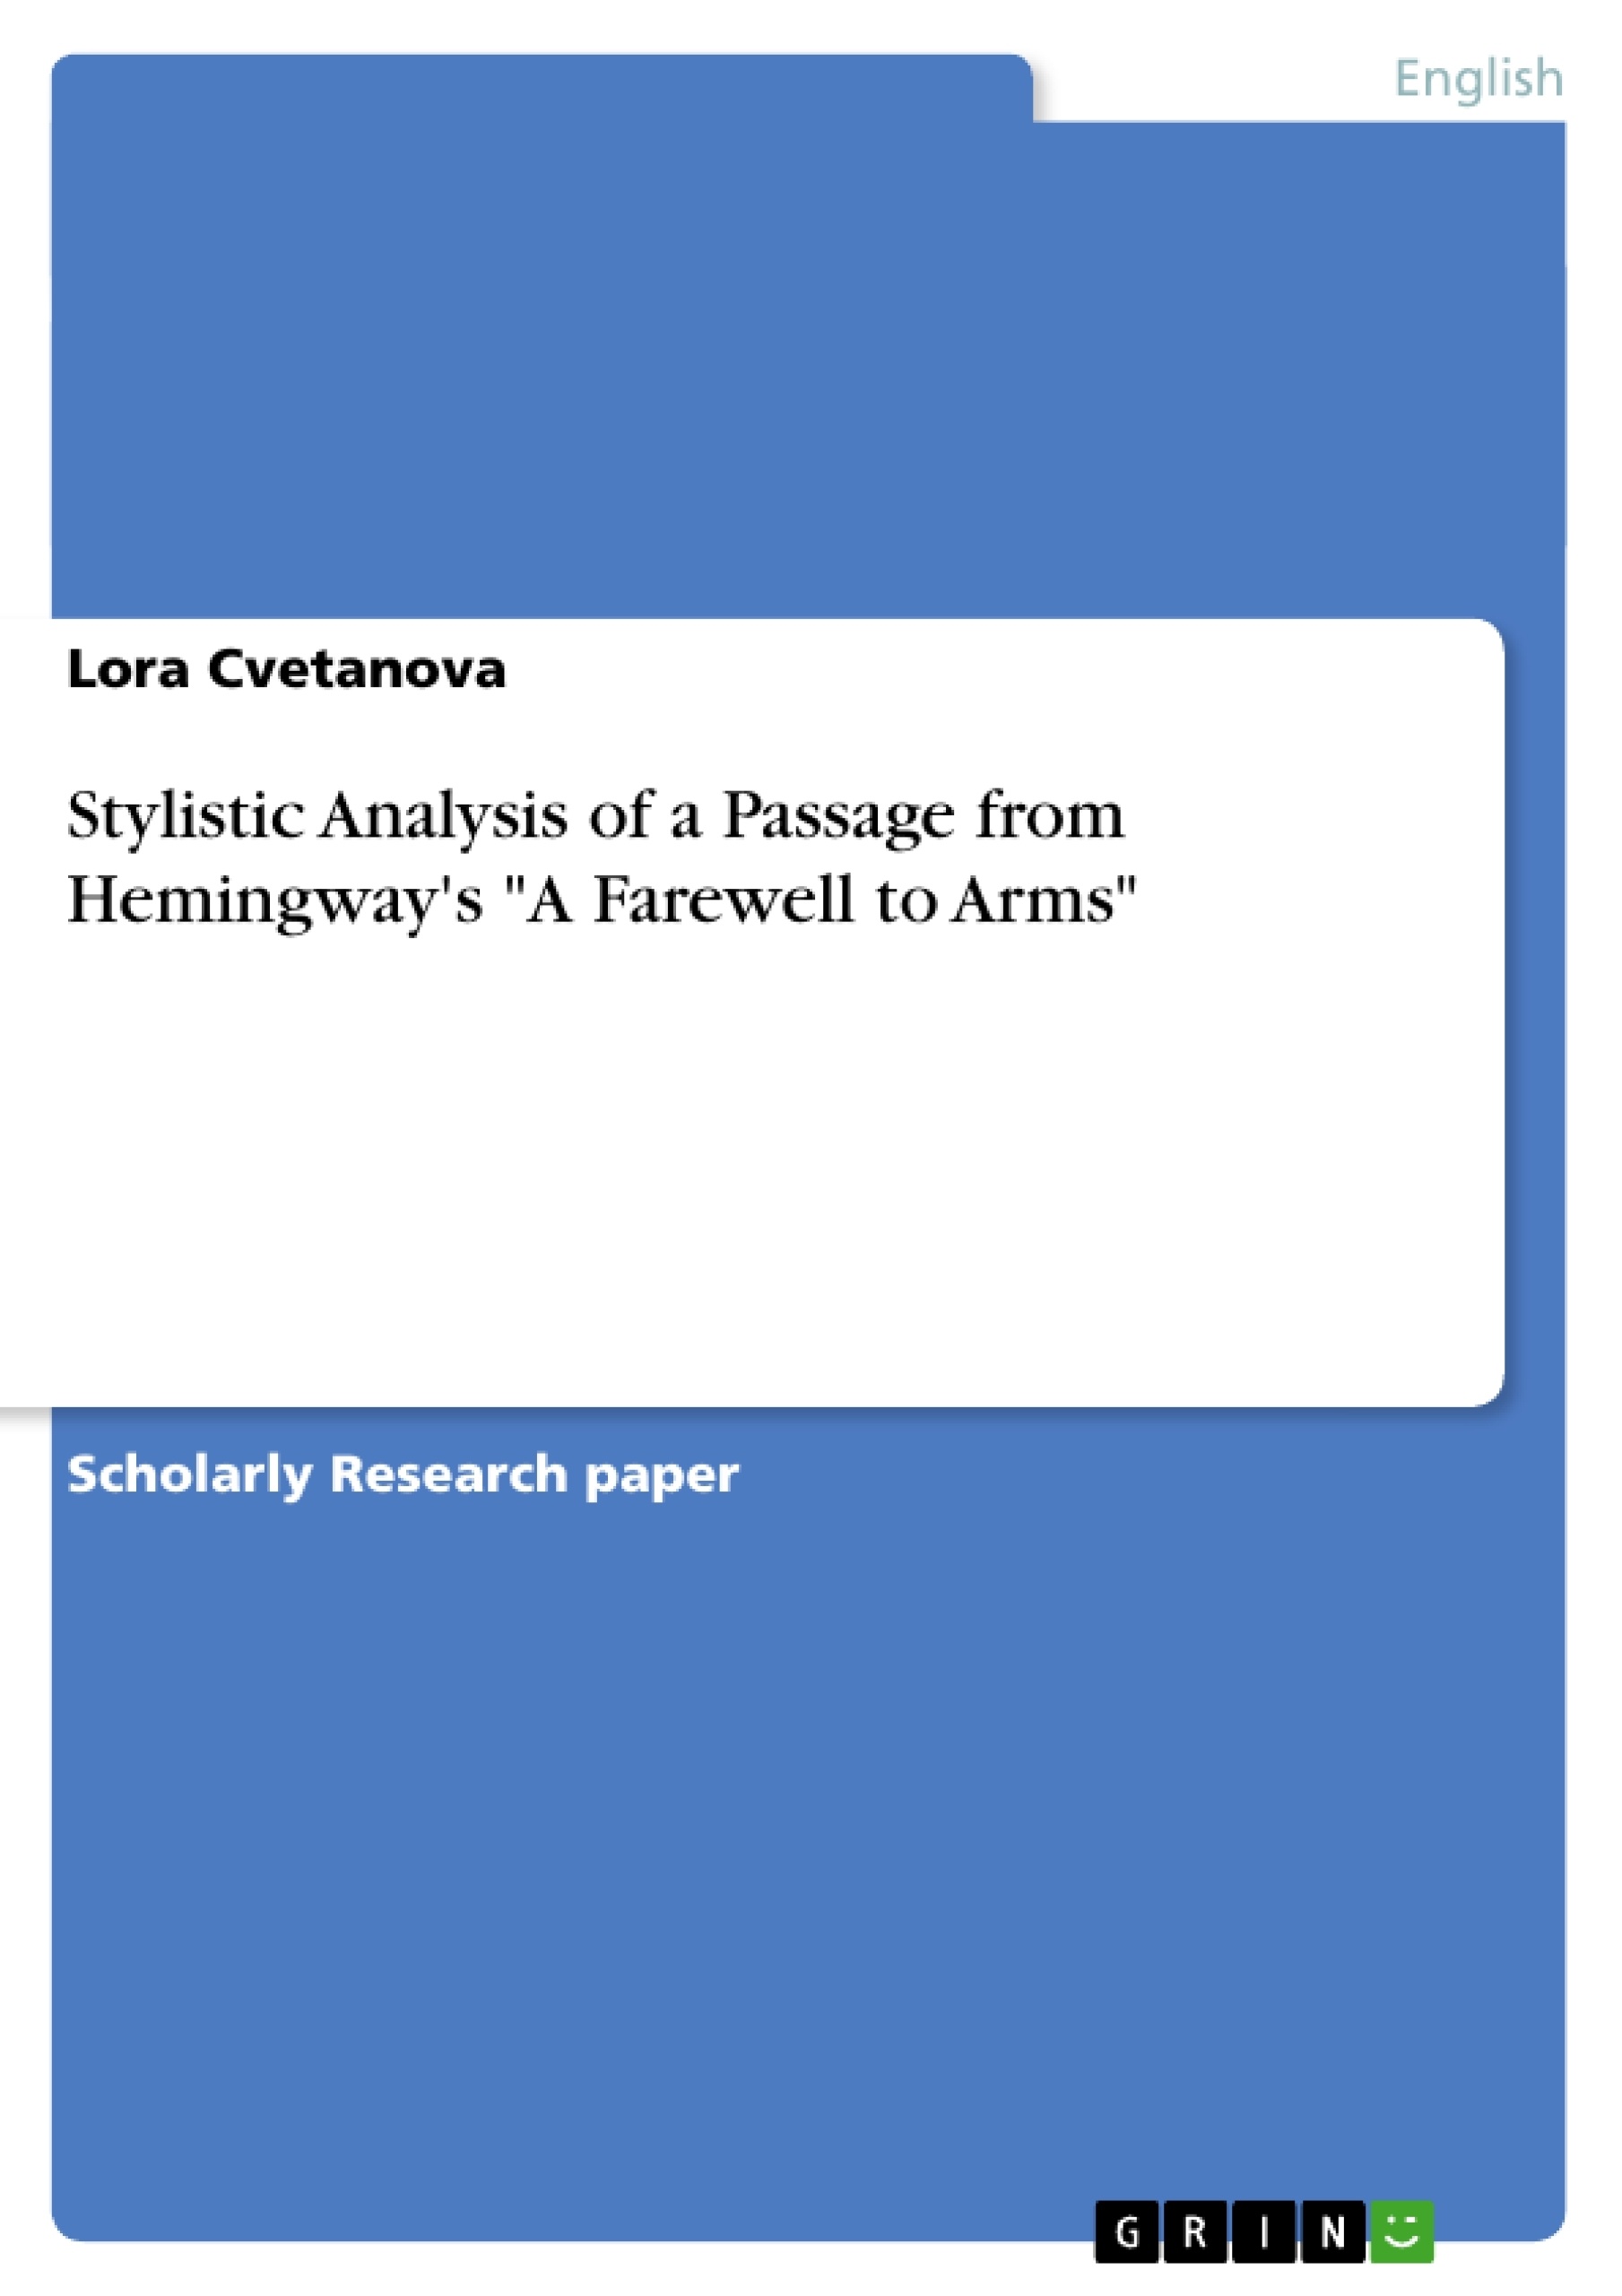 Ernest hemingway a farewell to arms thesis